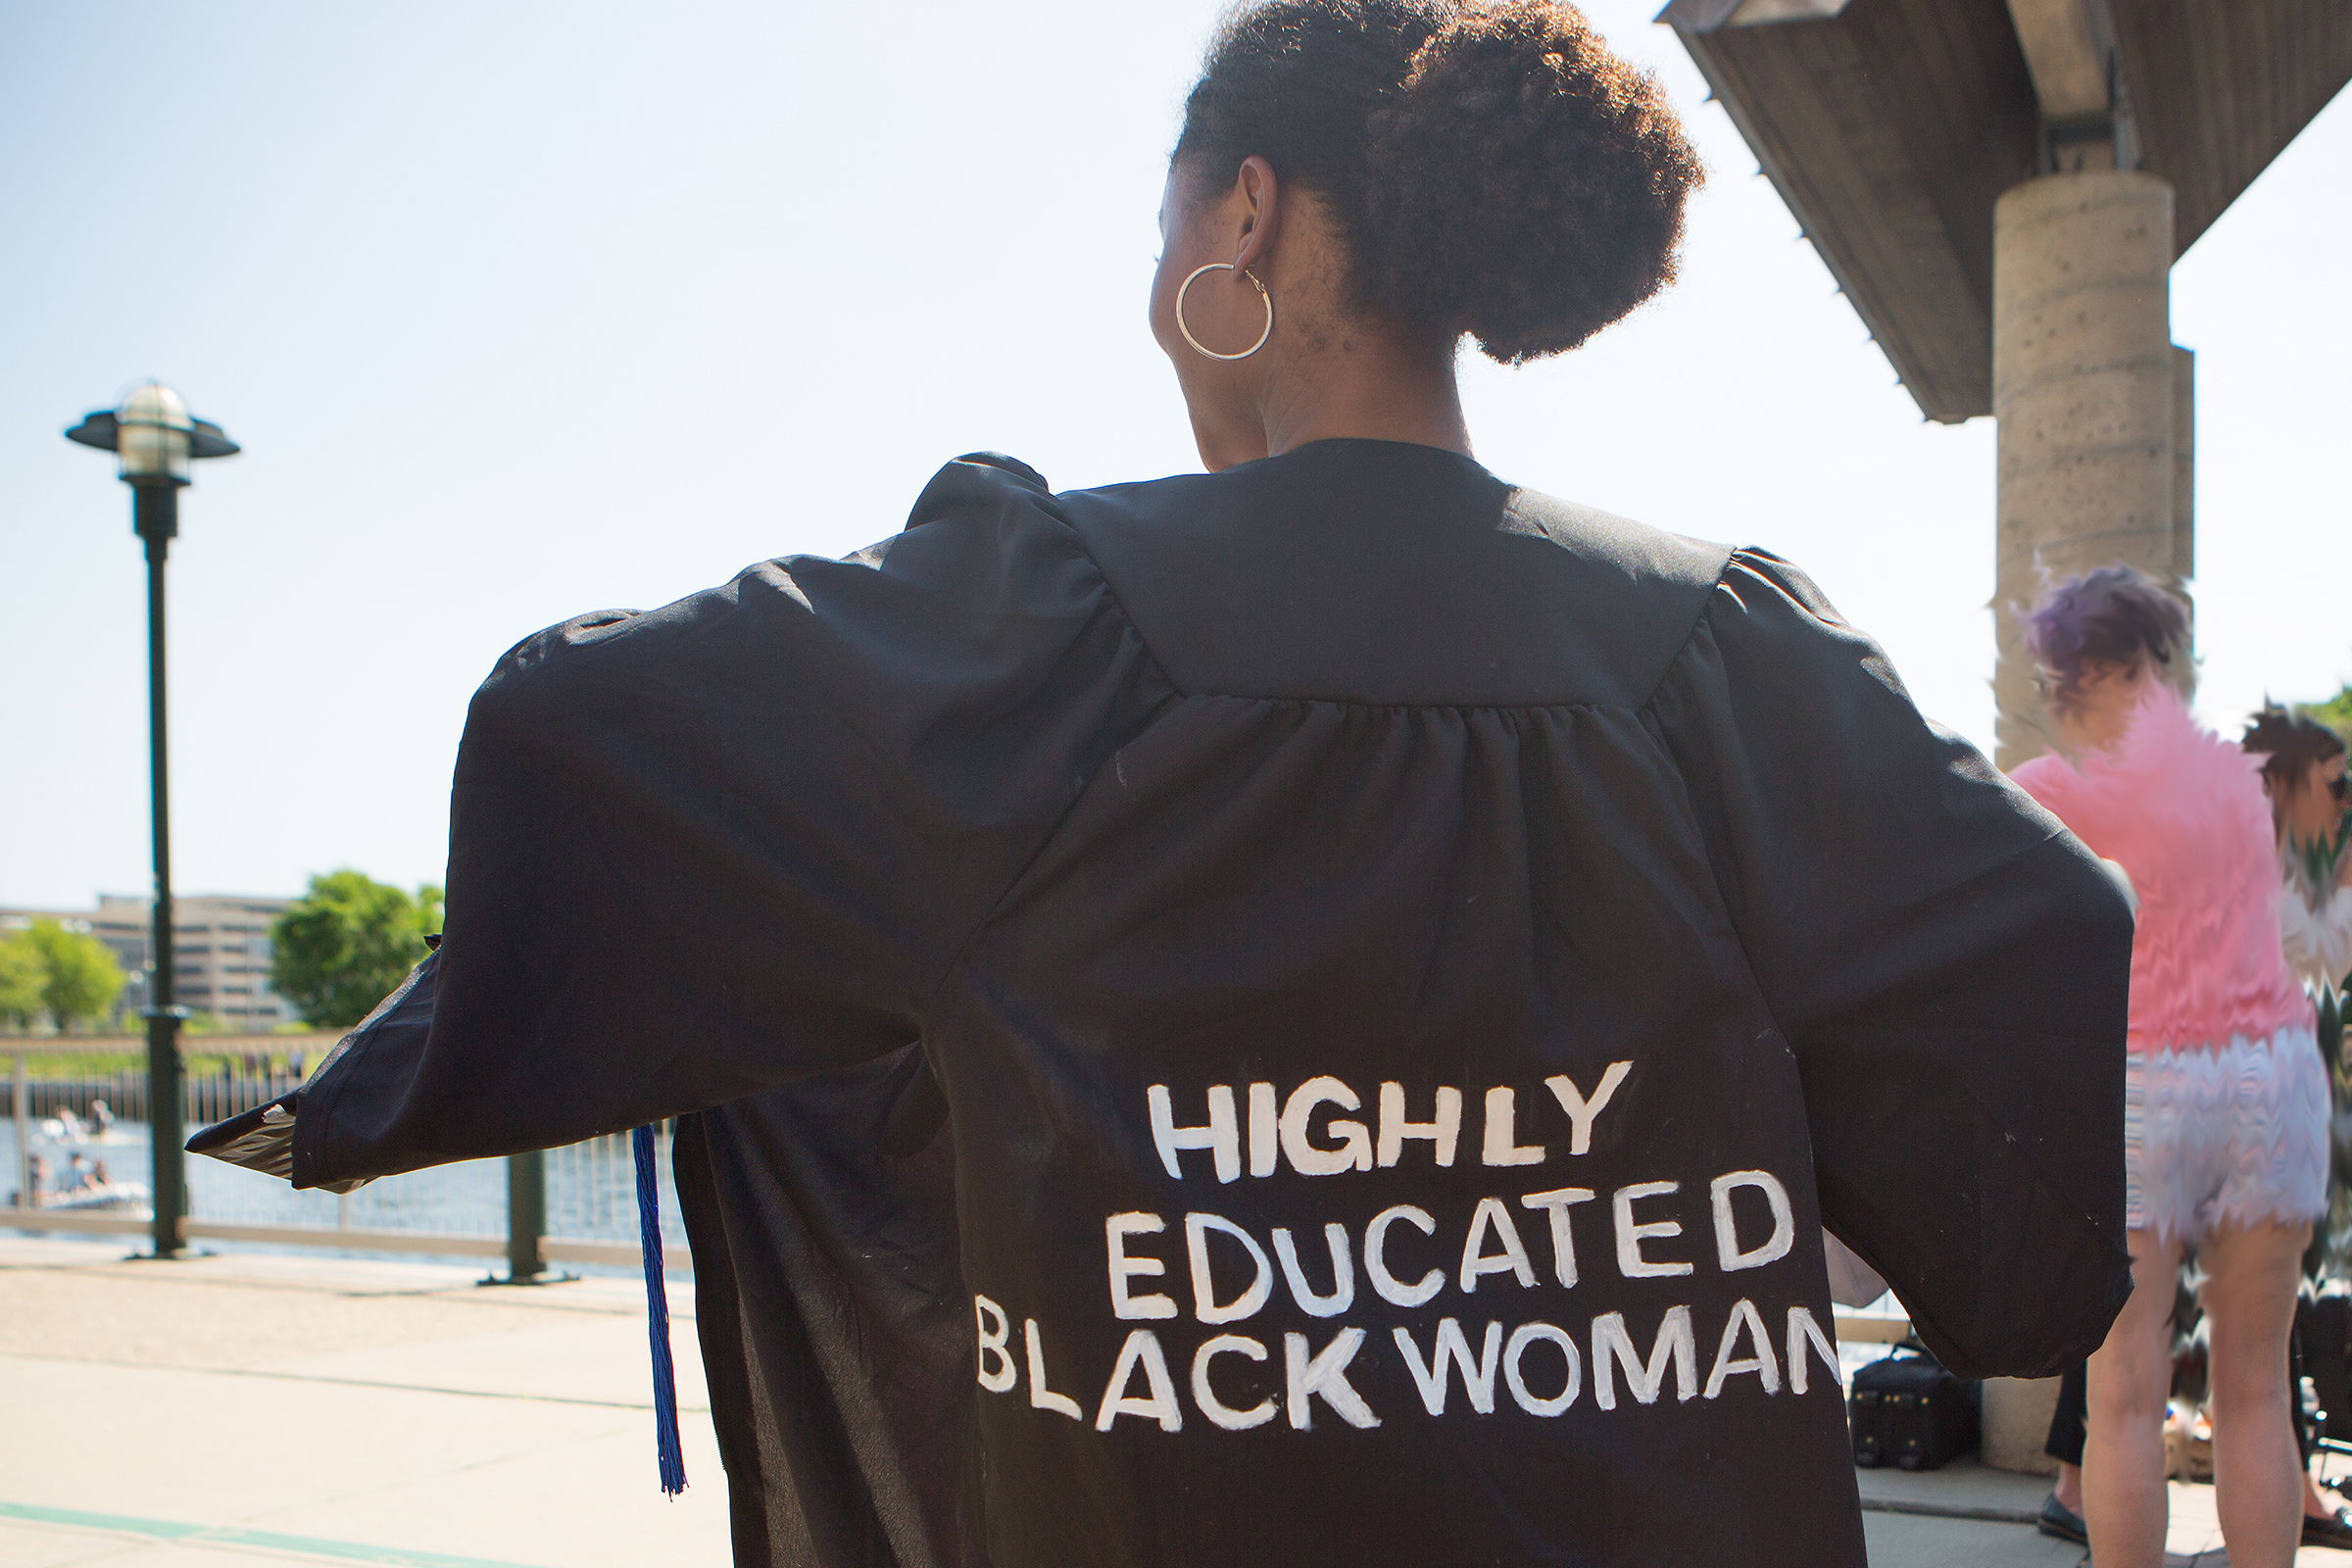 grad with sign on her back reading highly educated black woman